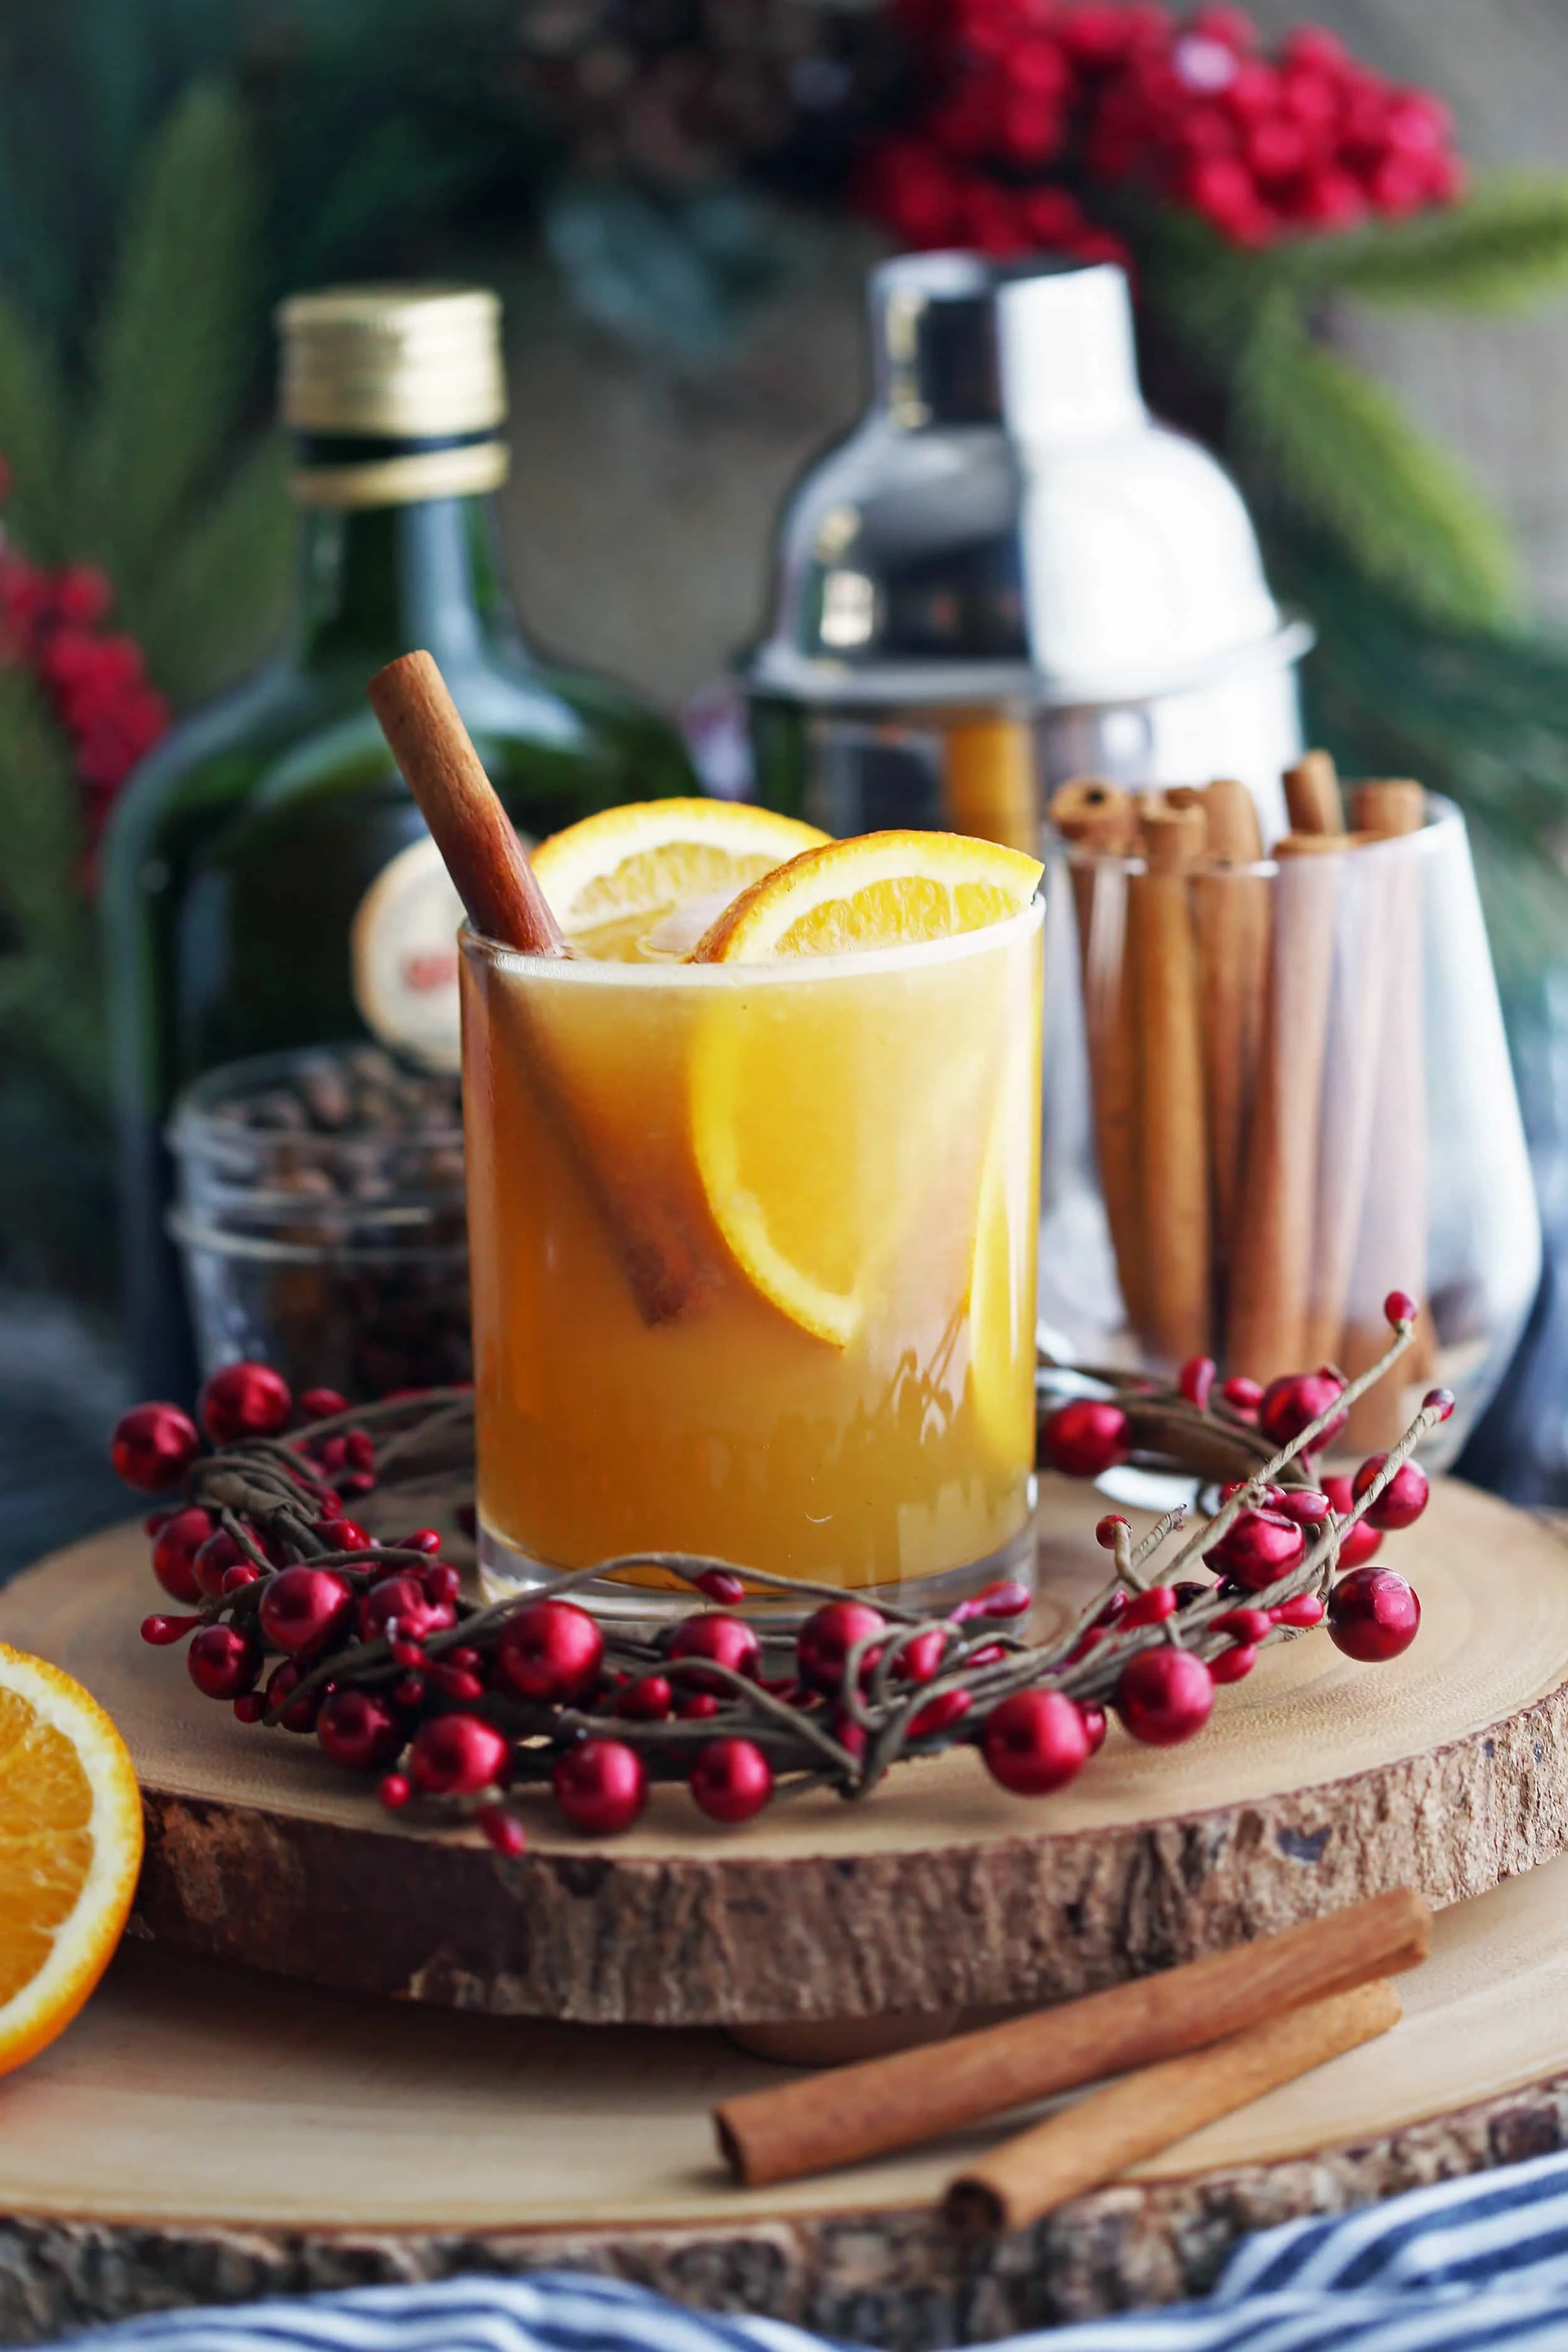 A wooden platter containing a glass of spiced orange brandy spritzer cocktail with orange slices and a cinnamon stick.